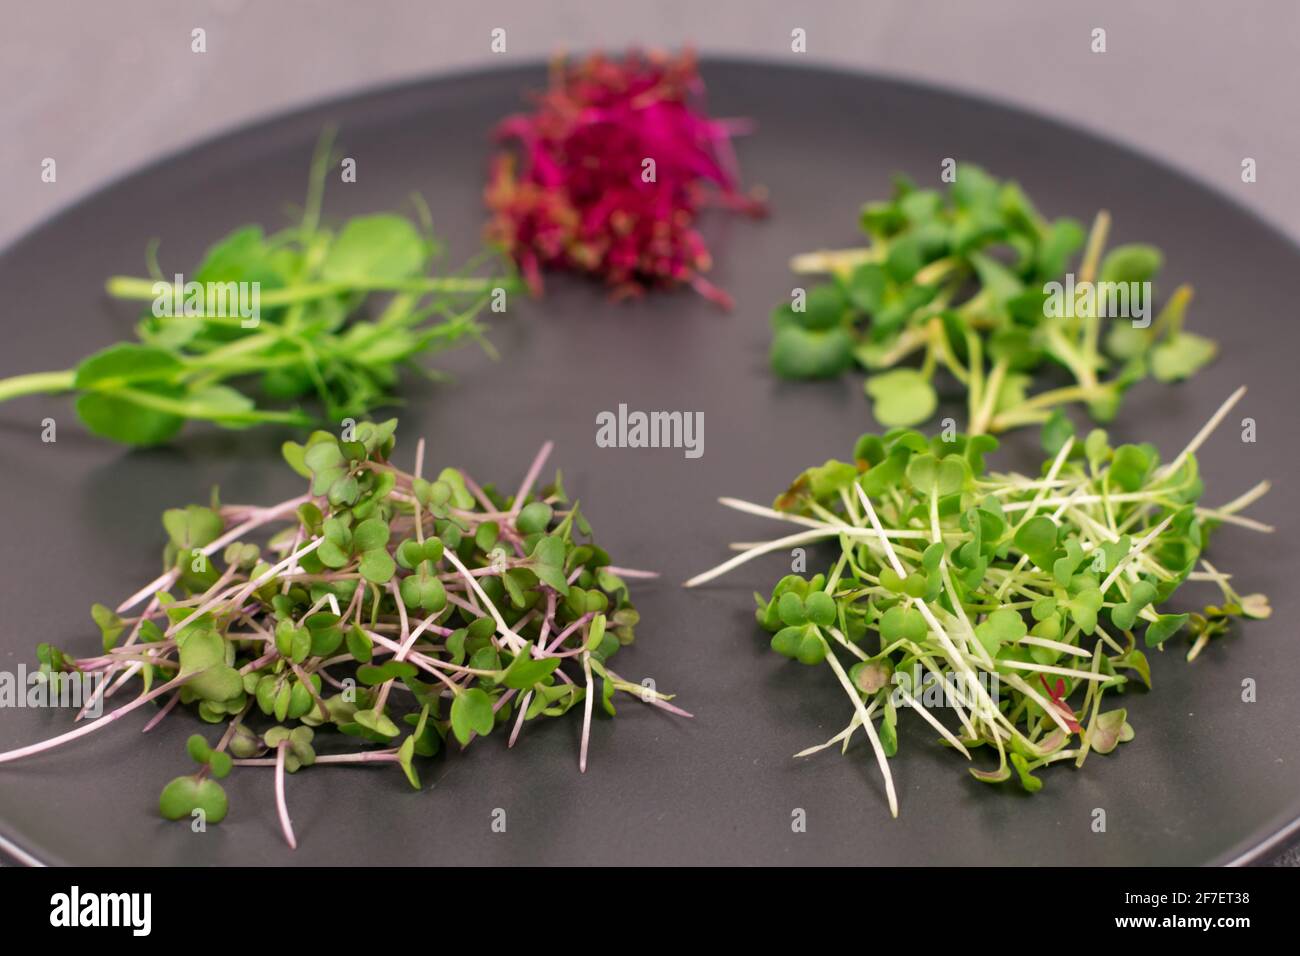 Sprouts on a gray plate on a gray background. Microgreens, radishes, mustard, arugula, peas, amaranth, antioxidant, detox, diet, salad supplement Stock Photo